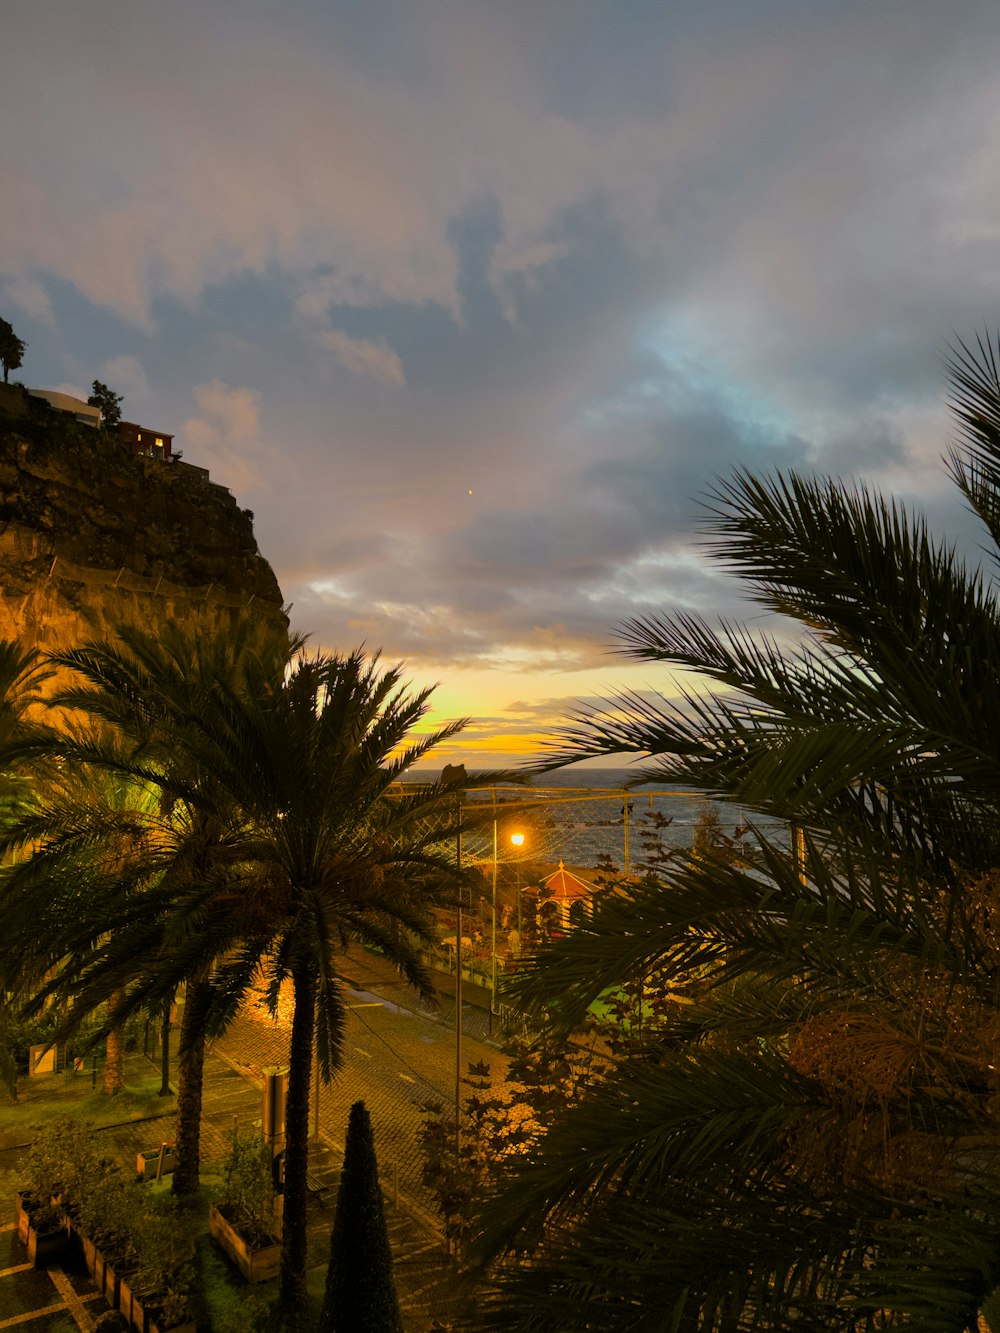 a view of a sunset with palm trees in the foreground